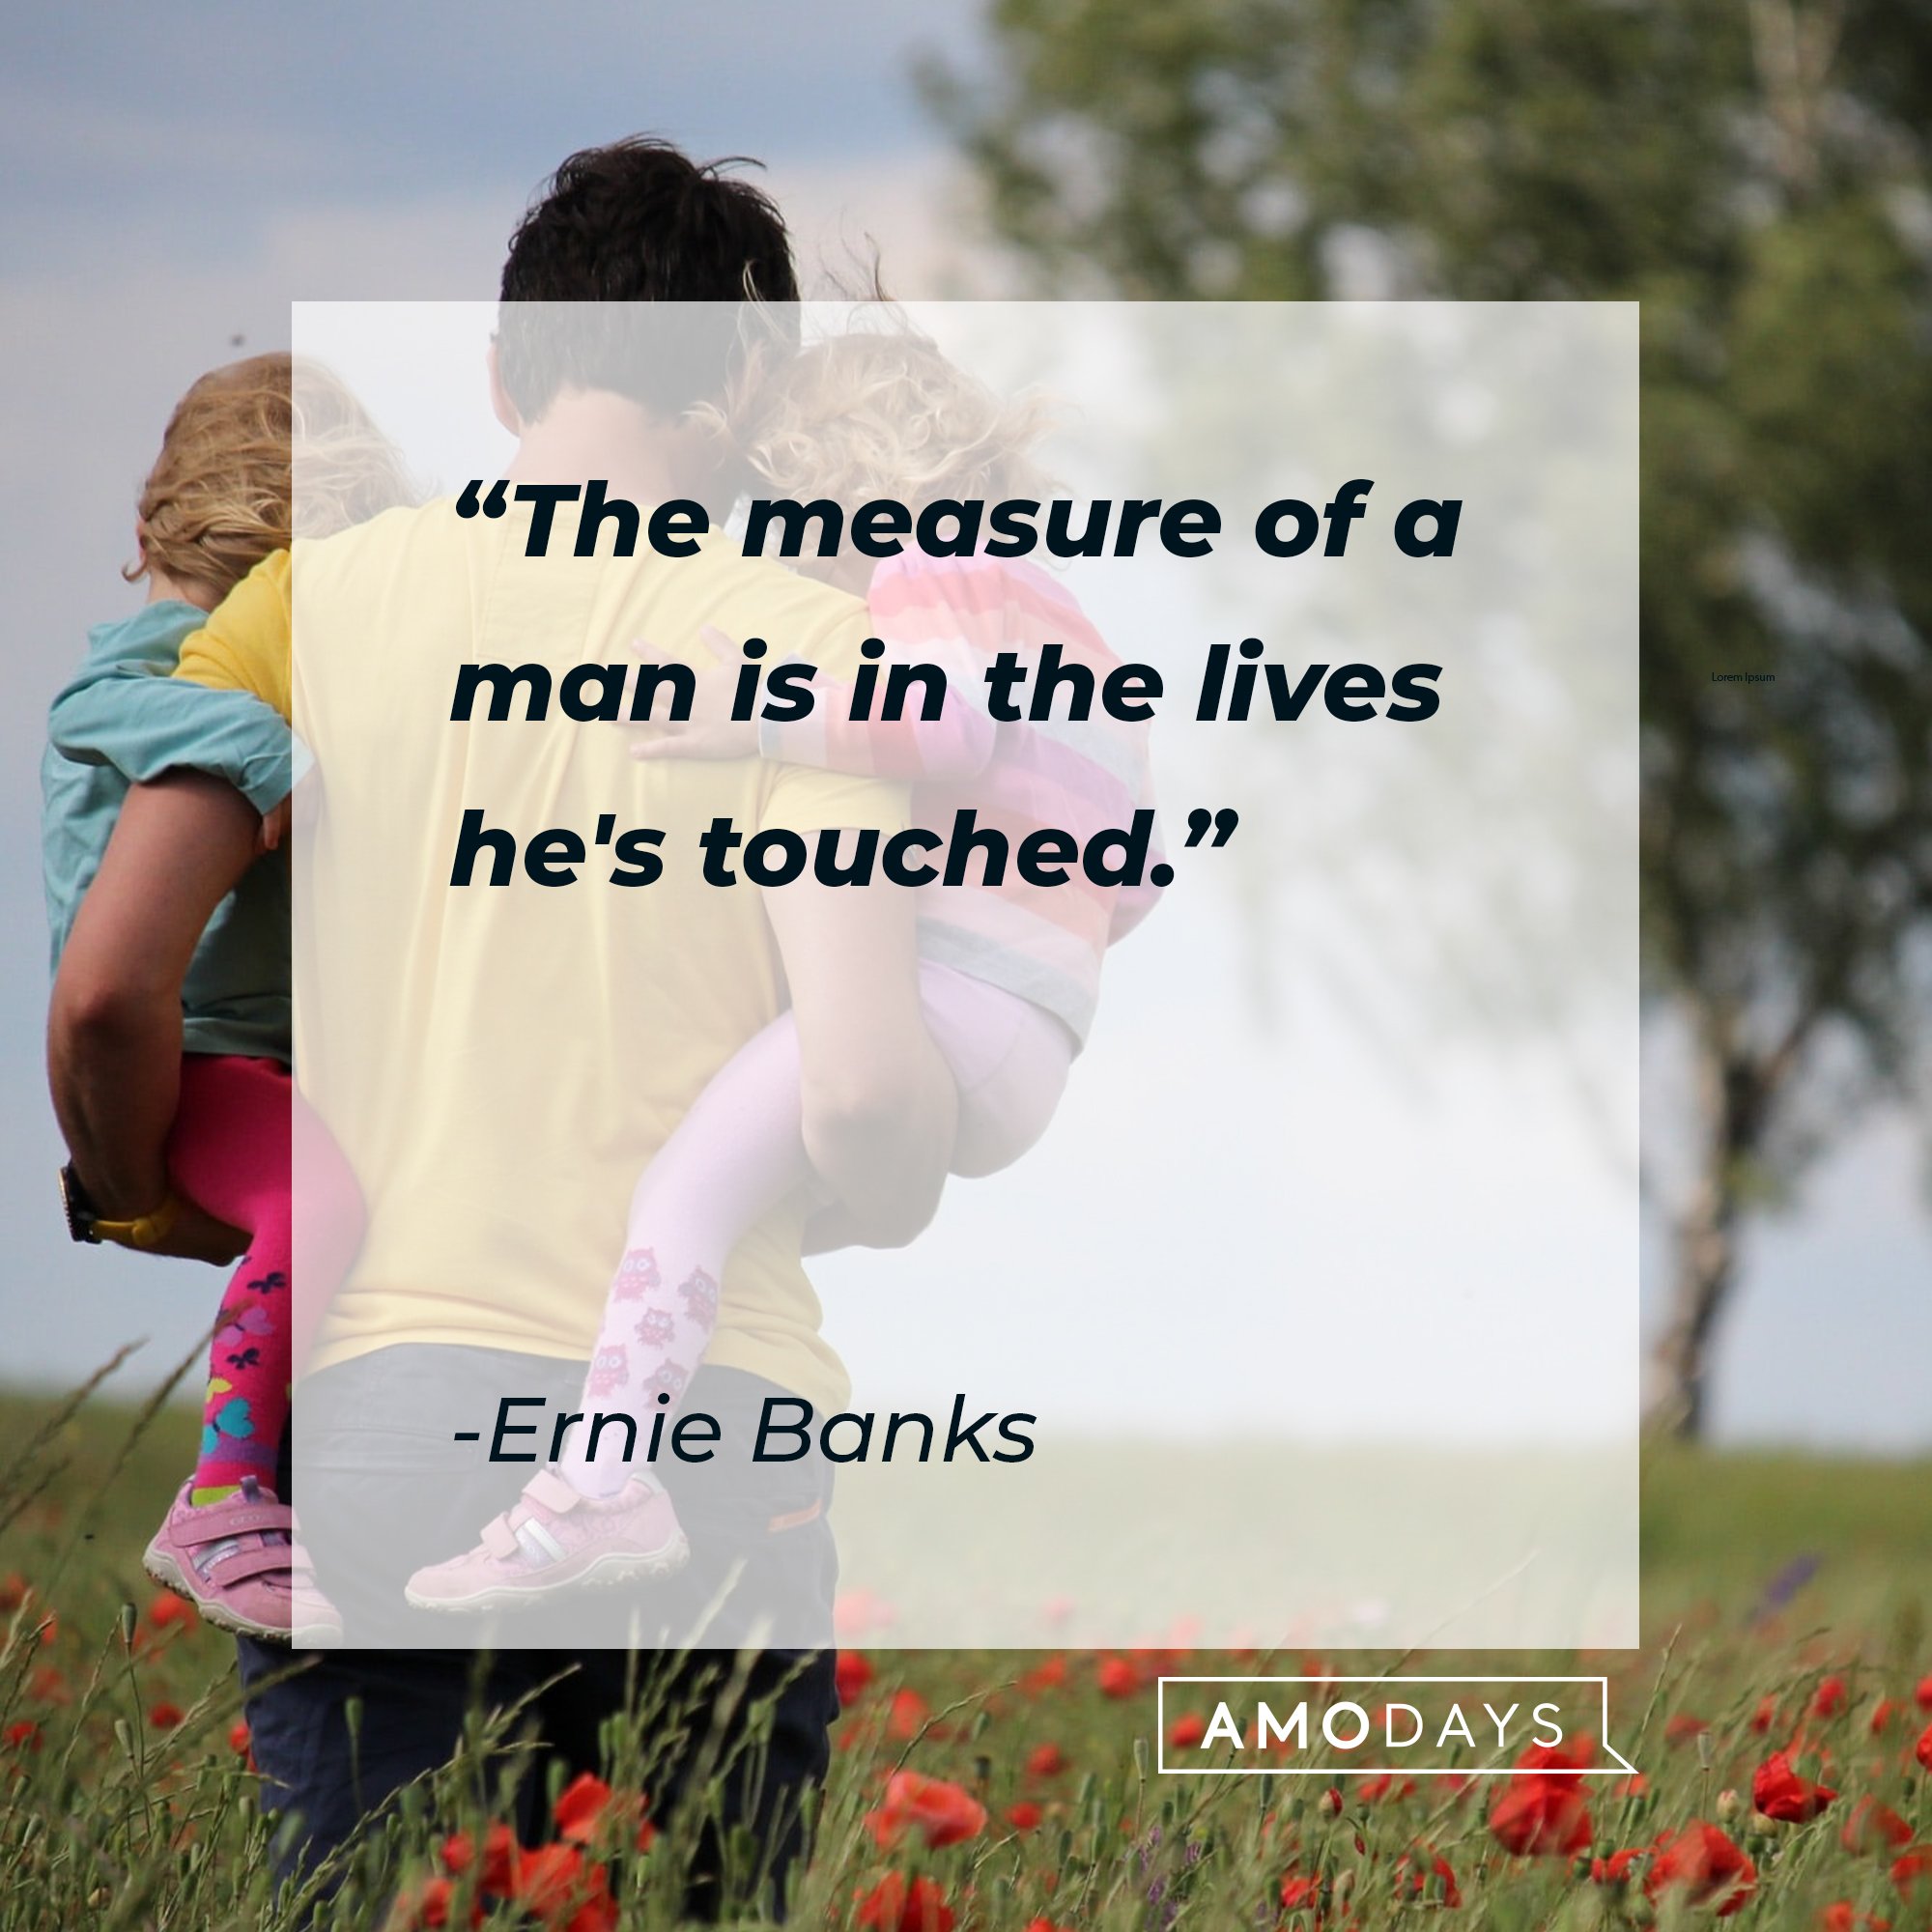 Ernie Banks’ quotes: "The measure of a man is in the lives he's touched." | Image: AmoDays